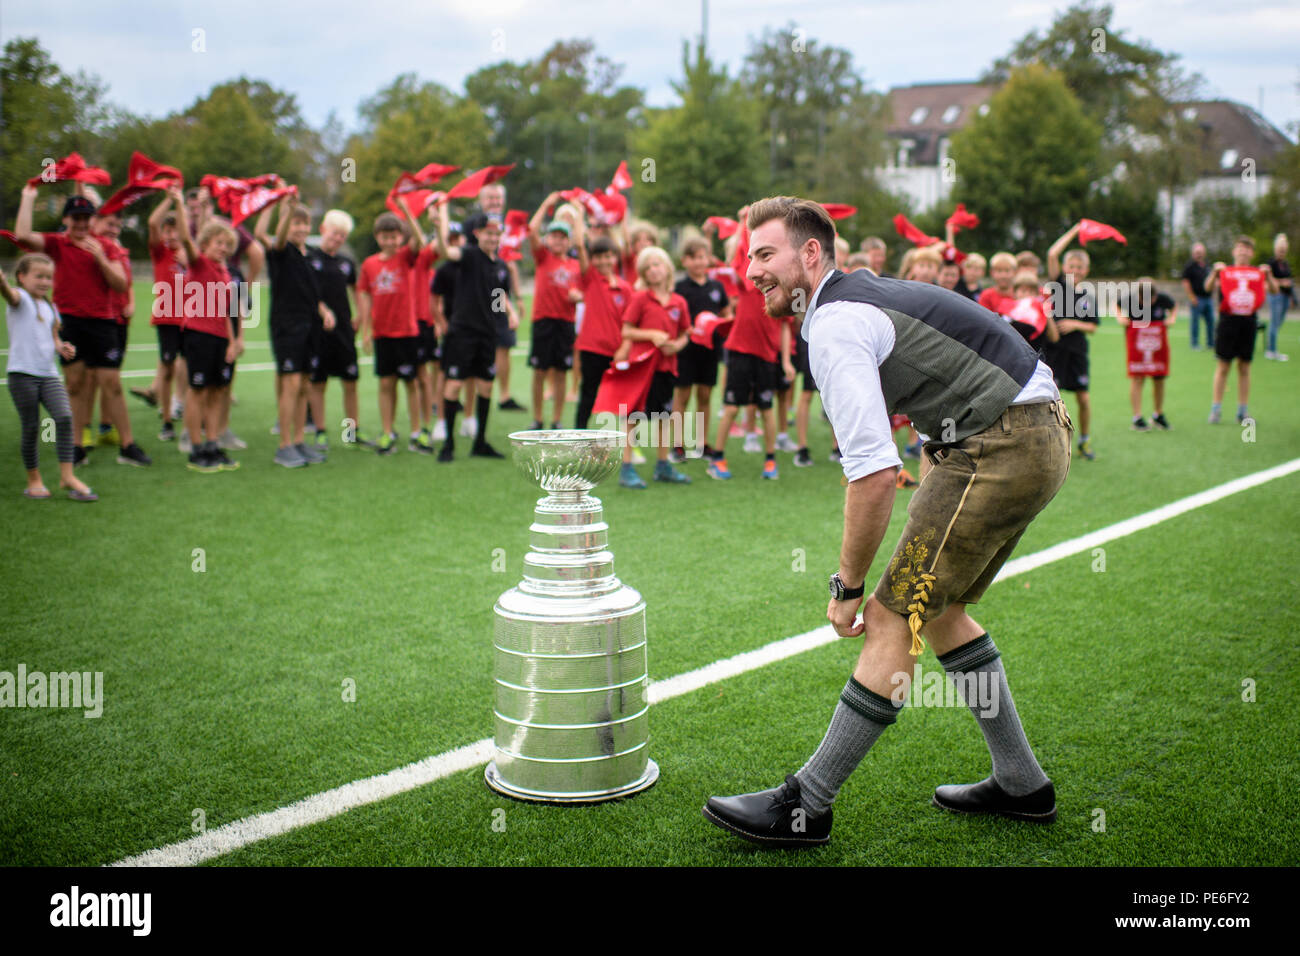 Rosenheim, Bavaria. 13th Aug, 2018. Philipp Grubauer, Stanley Cup winner with the Washington Capitals, will be welcomed with the ice hockey trophy at emilo Stadium by players of the Starbulls Rosenheim ice hockey teams. Born in Rosenheim, he was the first German goalkeeper to win the North American League title. Credit: Matthias Balk/dpa/Alamy Live News Stock Photo